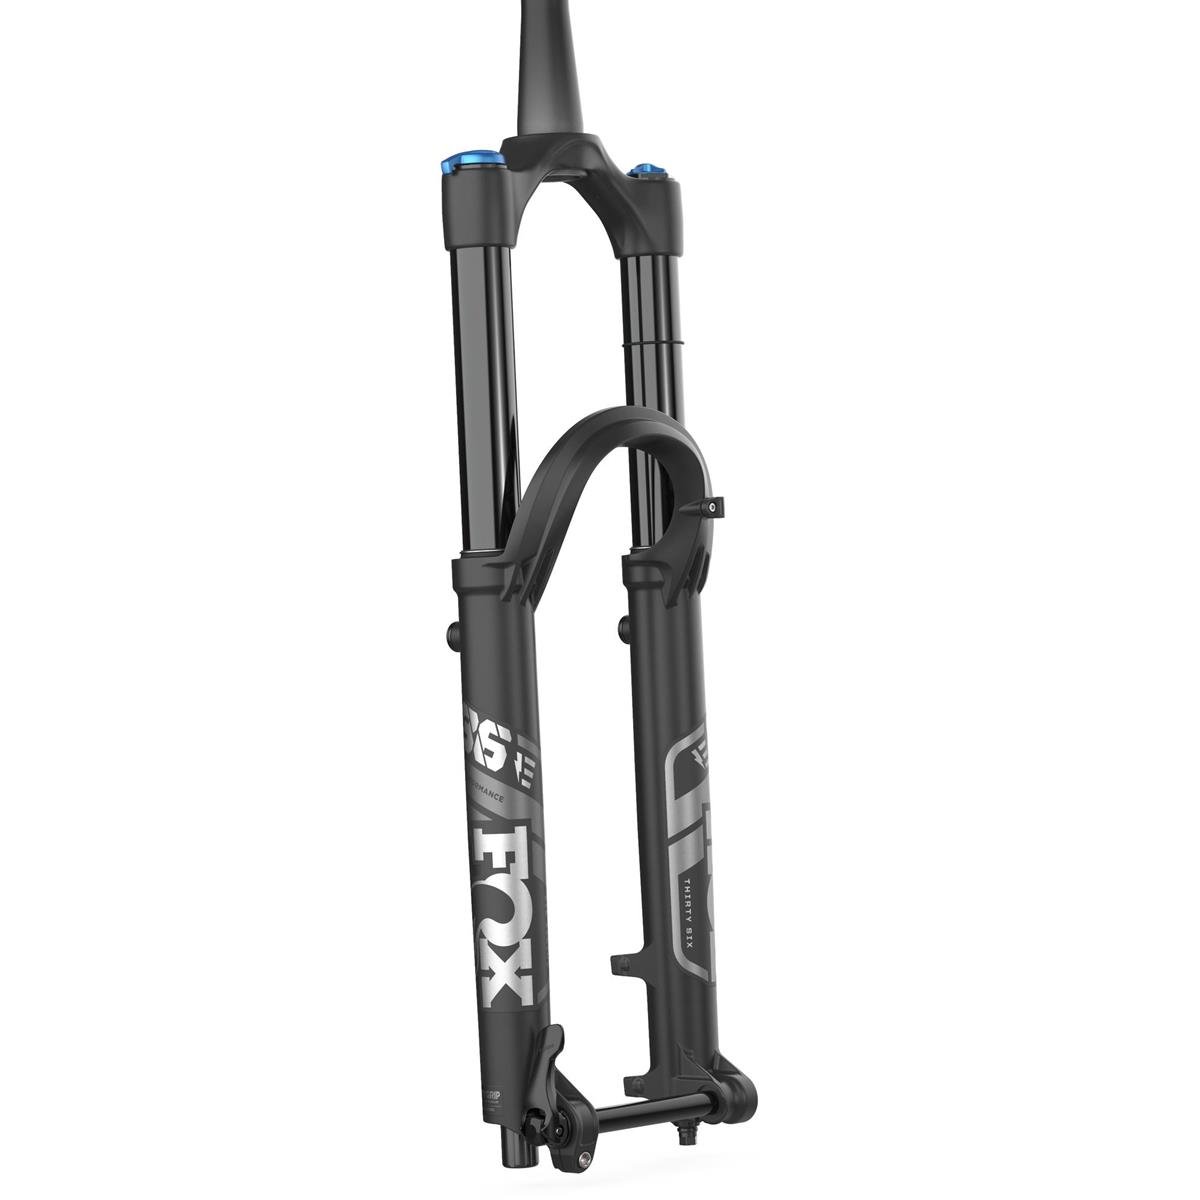 Fox Racing Shox Forcella 36 Float Performance E-Optimized 29 Pollici, 15x110 mm, GRIP, 44 mm Offset, 160 mm